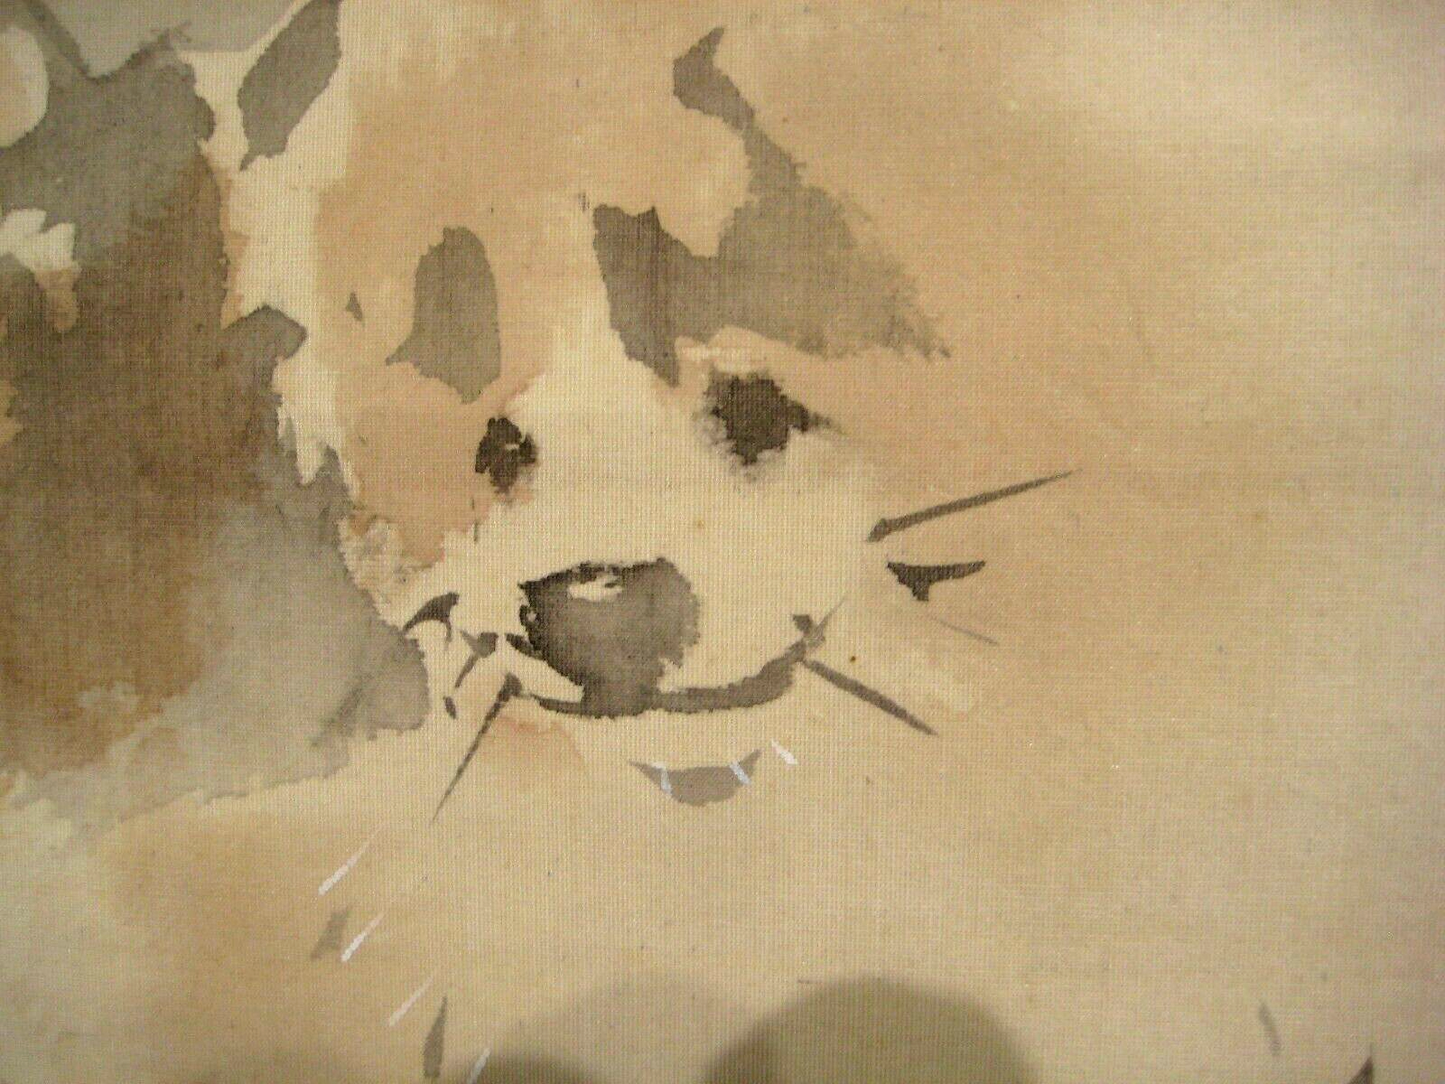 Vintage Japanese Scroll Two Fuzzy Akita Dogs Playimg In The Snow